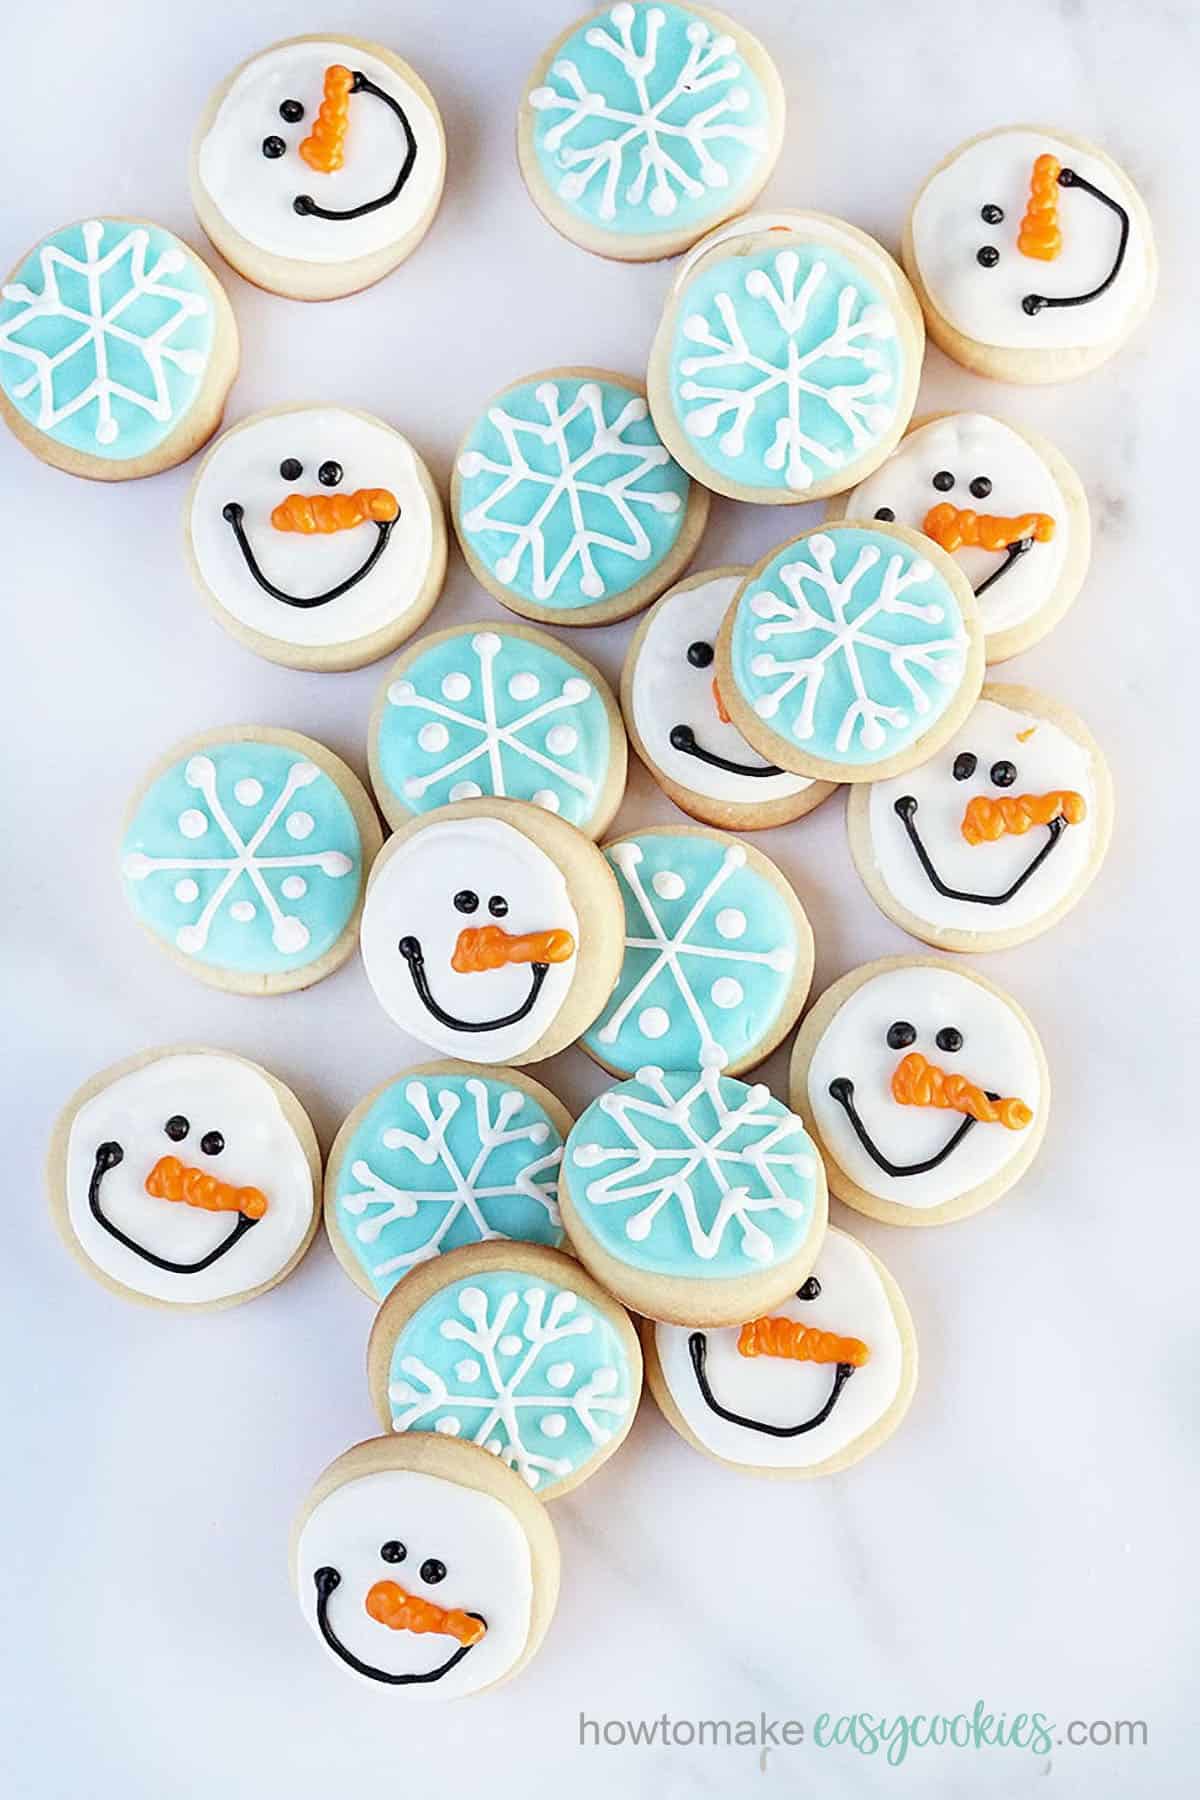 mini snowman and snowflake decorated Christmas sugar cookies with powdered sugar